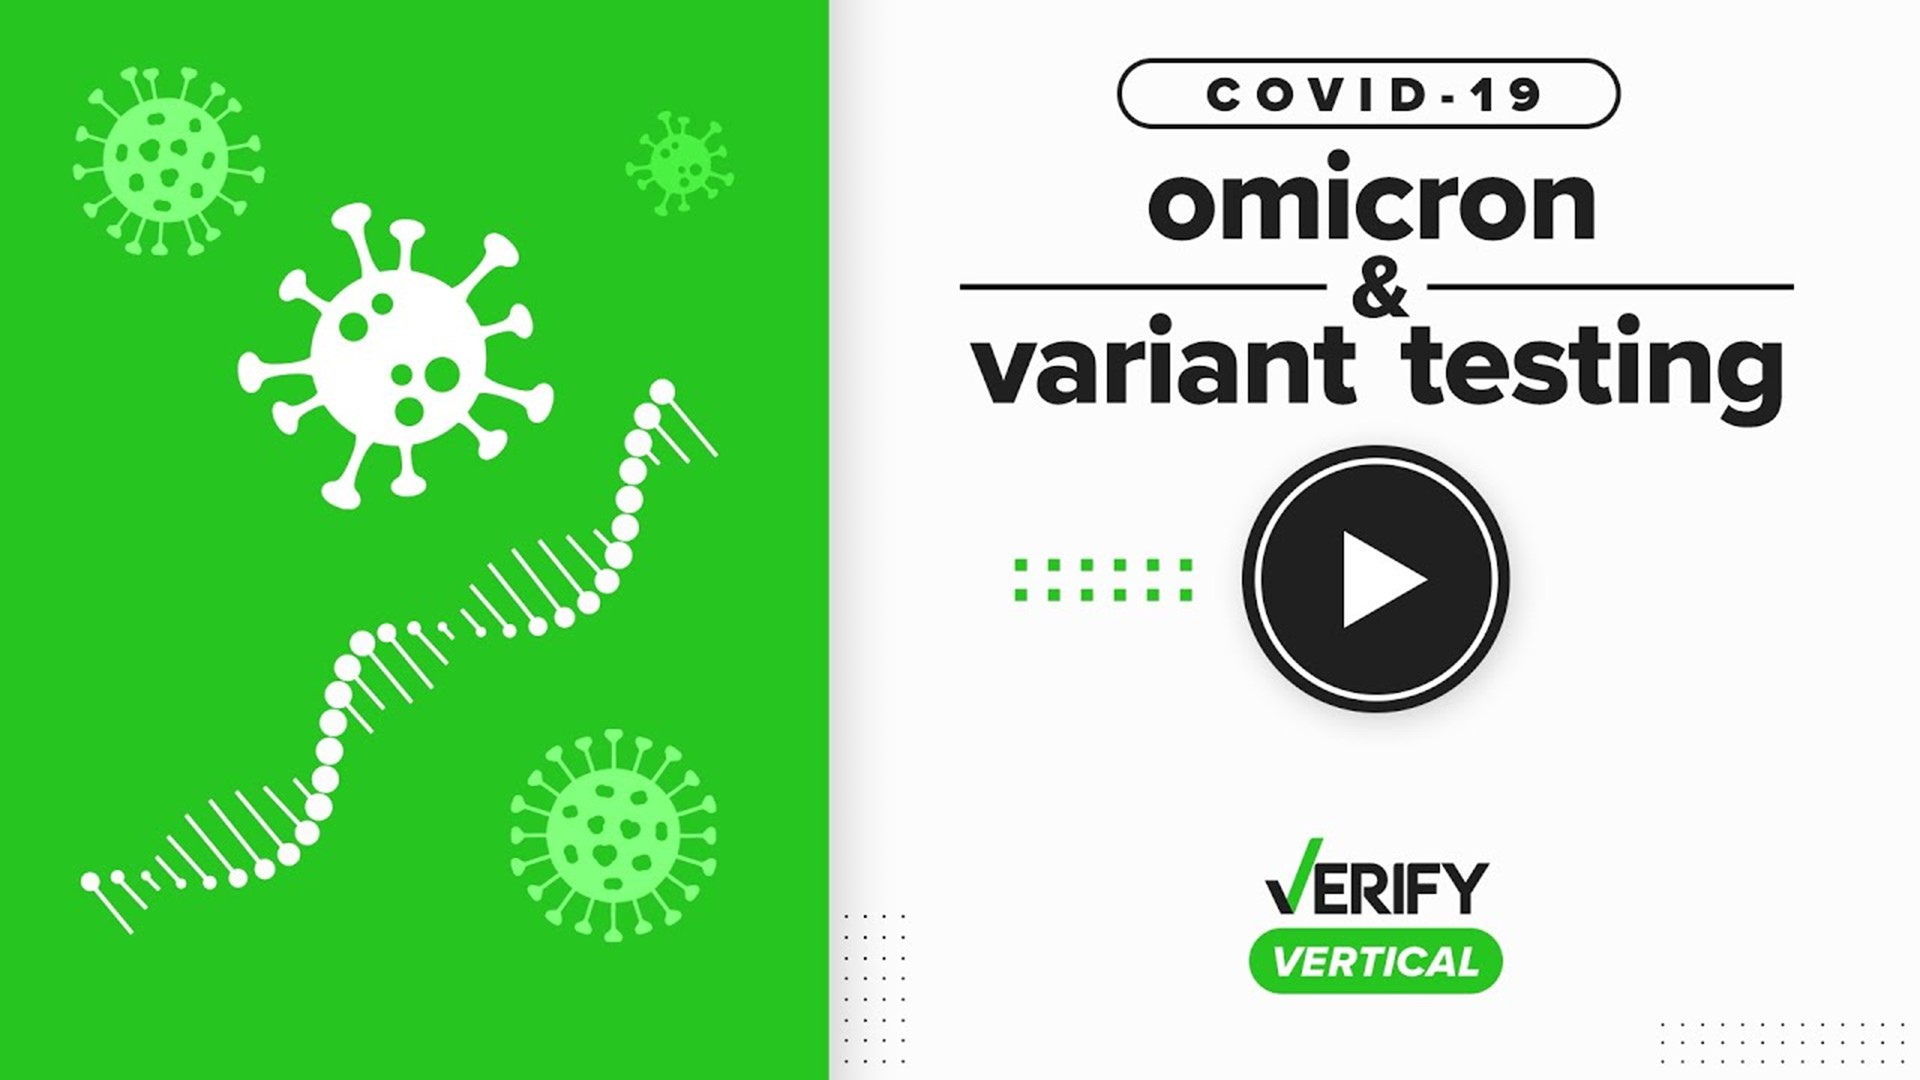 The omicron variant of COVID-19 was first reported in November and has spread across the world, including in the U.S. Here’s what we know about the variant.